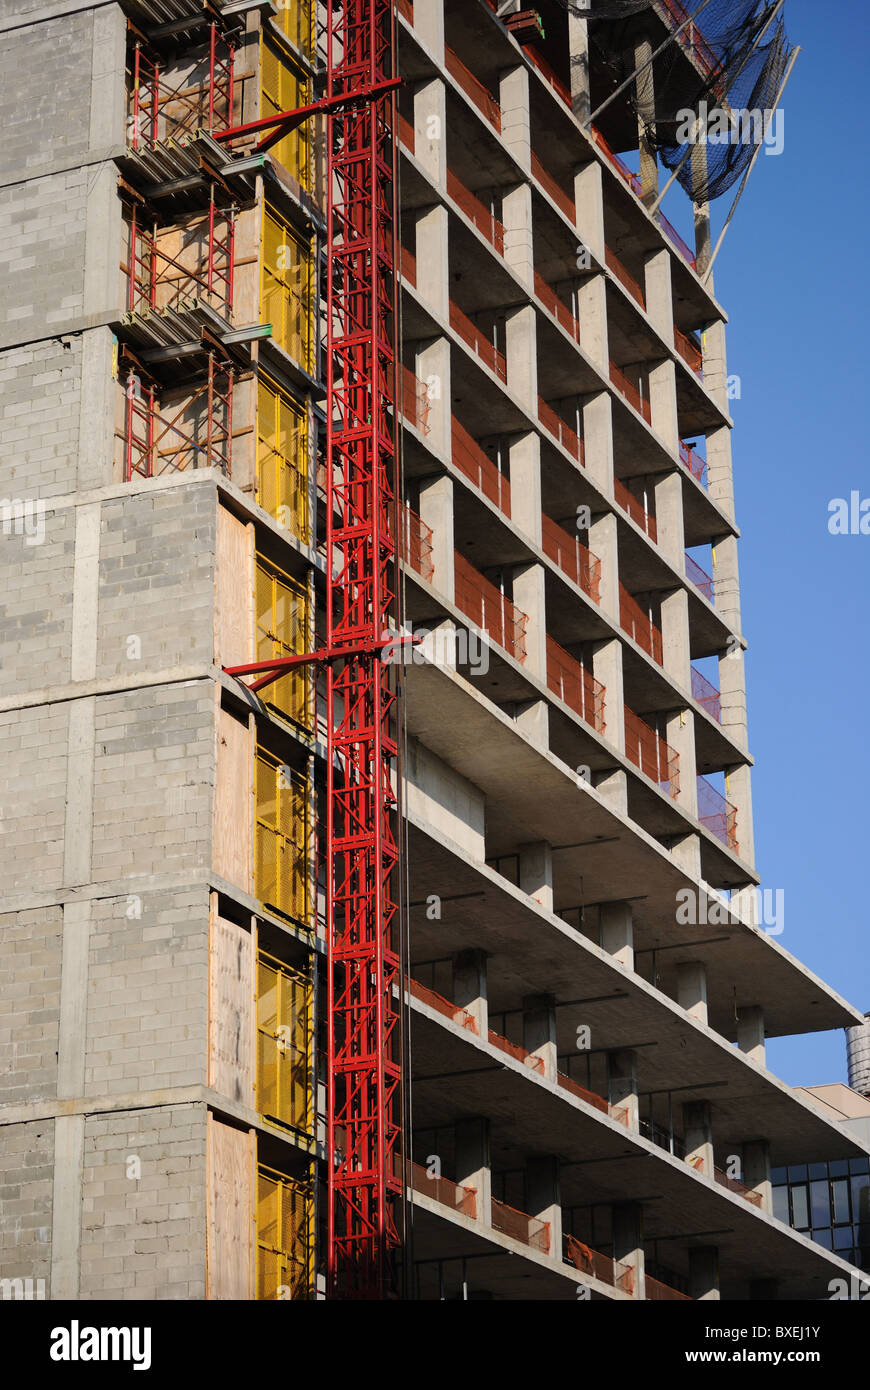 A building under construction Stock Photo